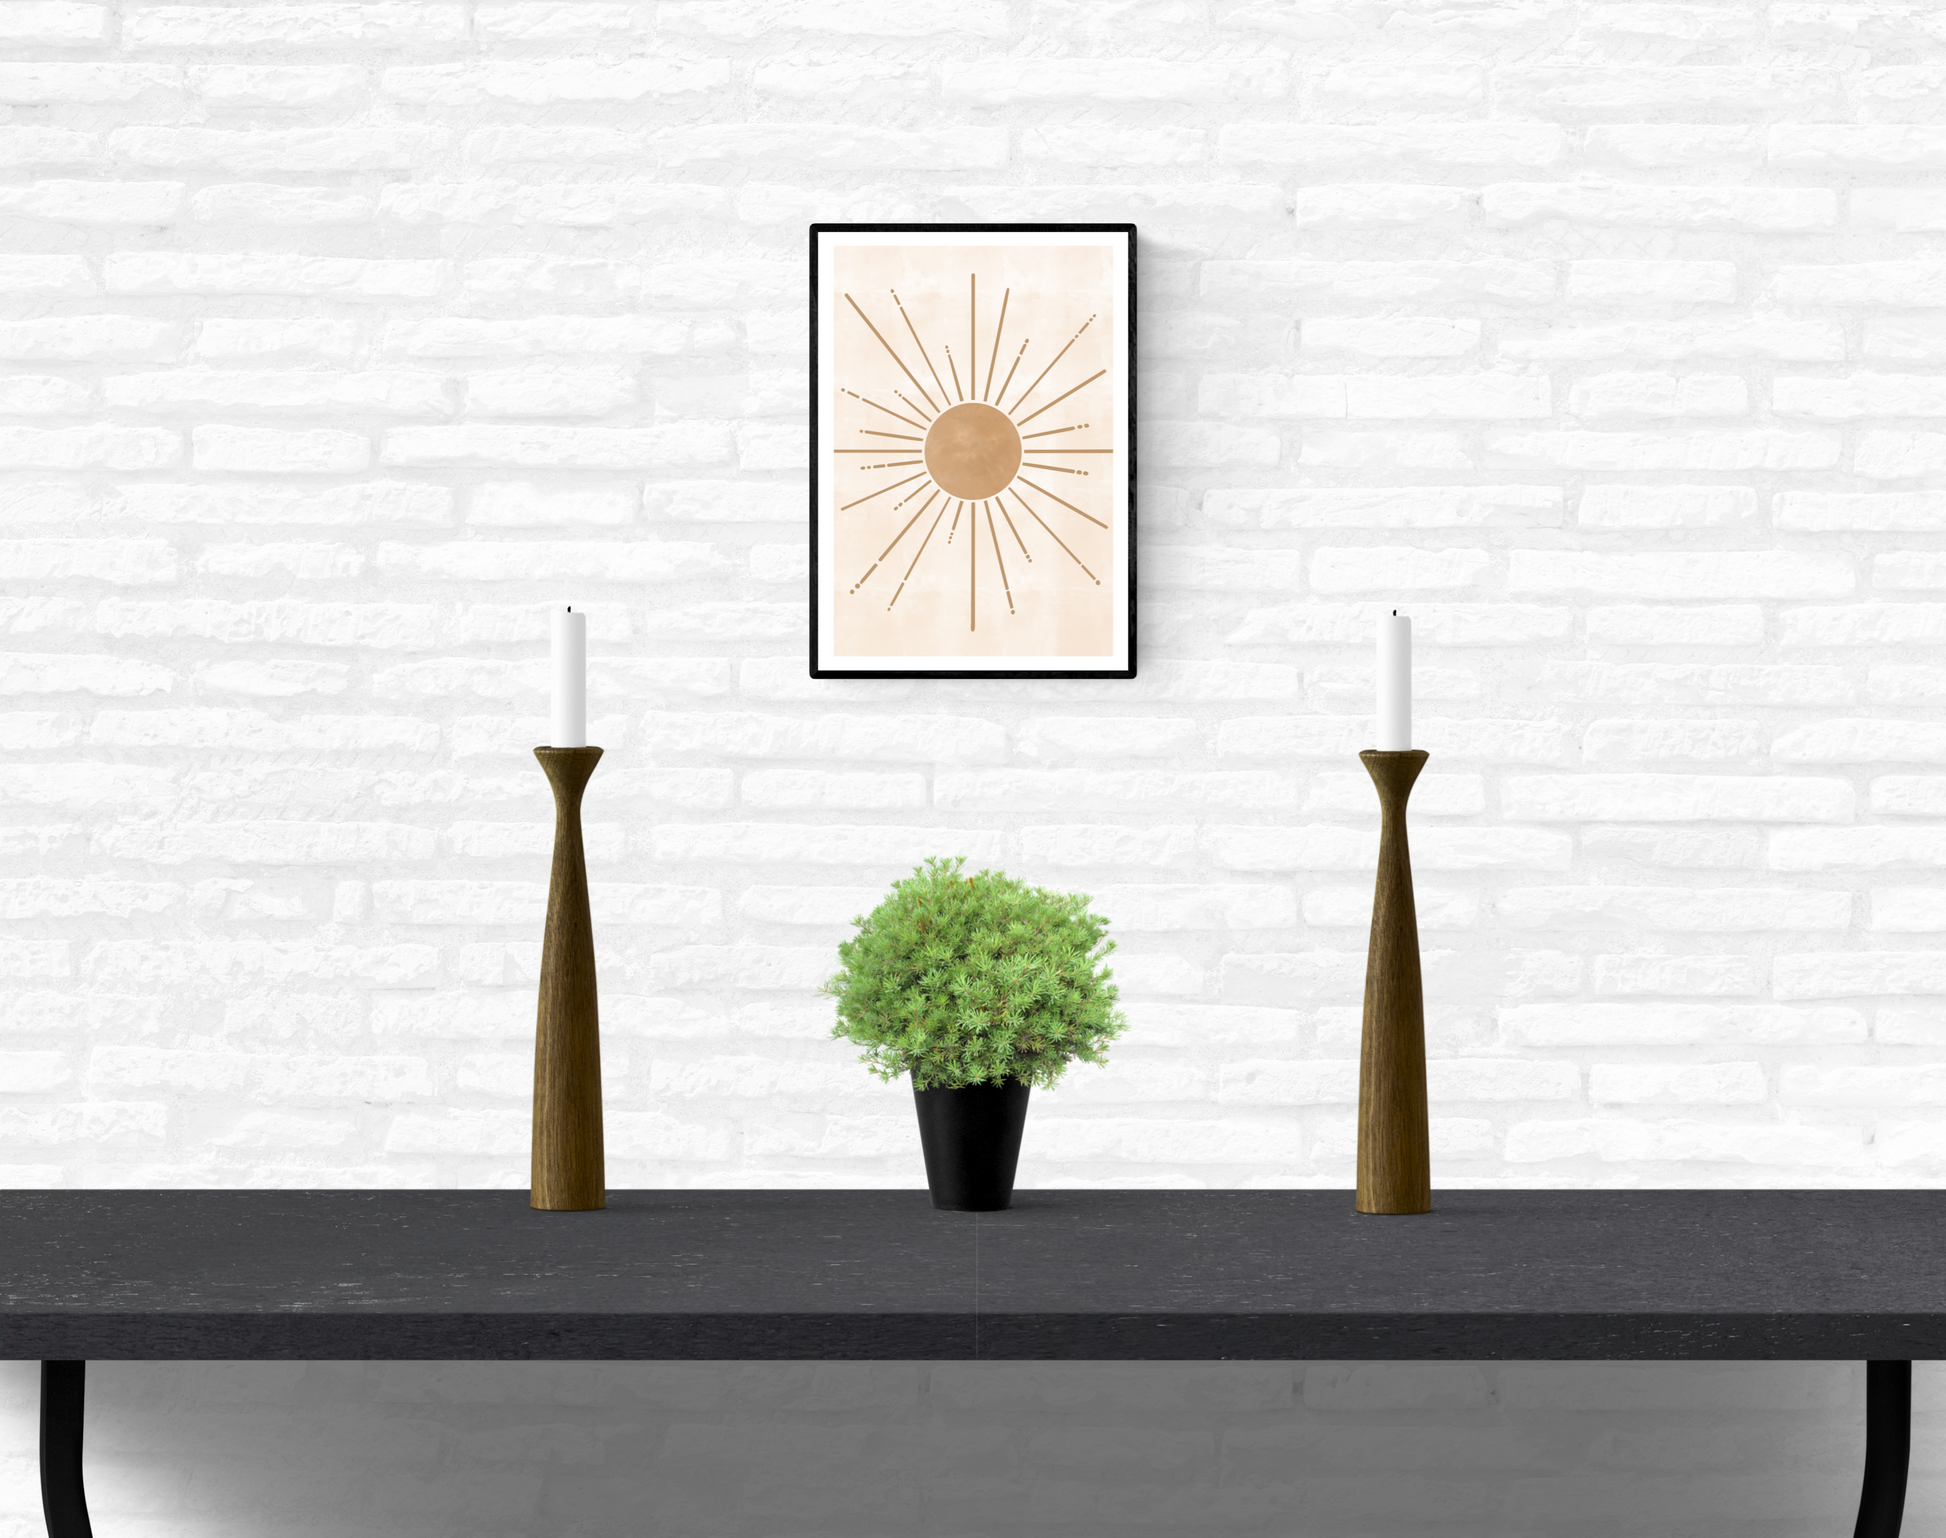 Wall art illustration of a bronze coloured Sun with bronze coloured sun rays, framed and mounted on an interior white brick wall above a table